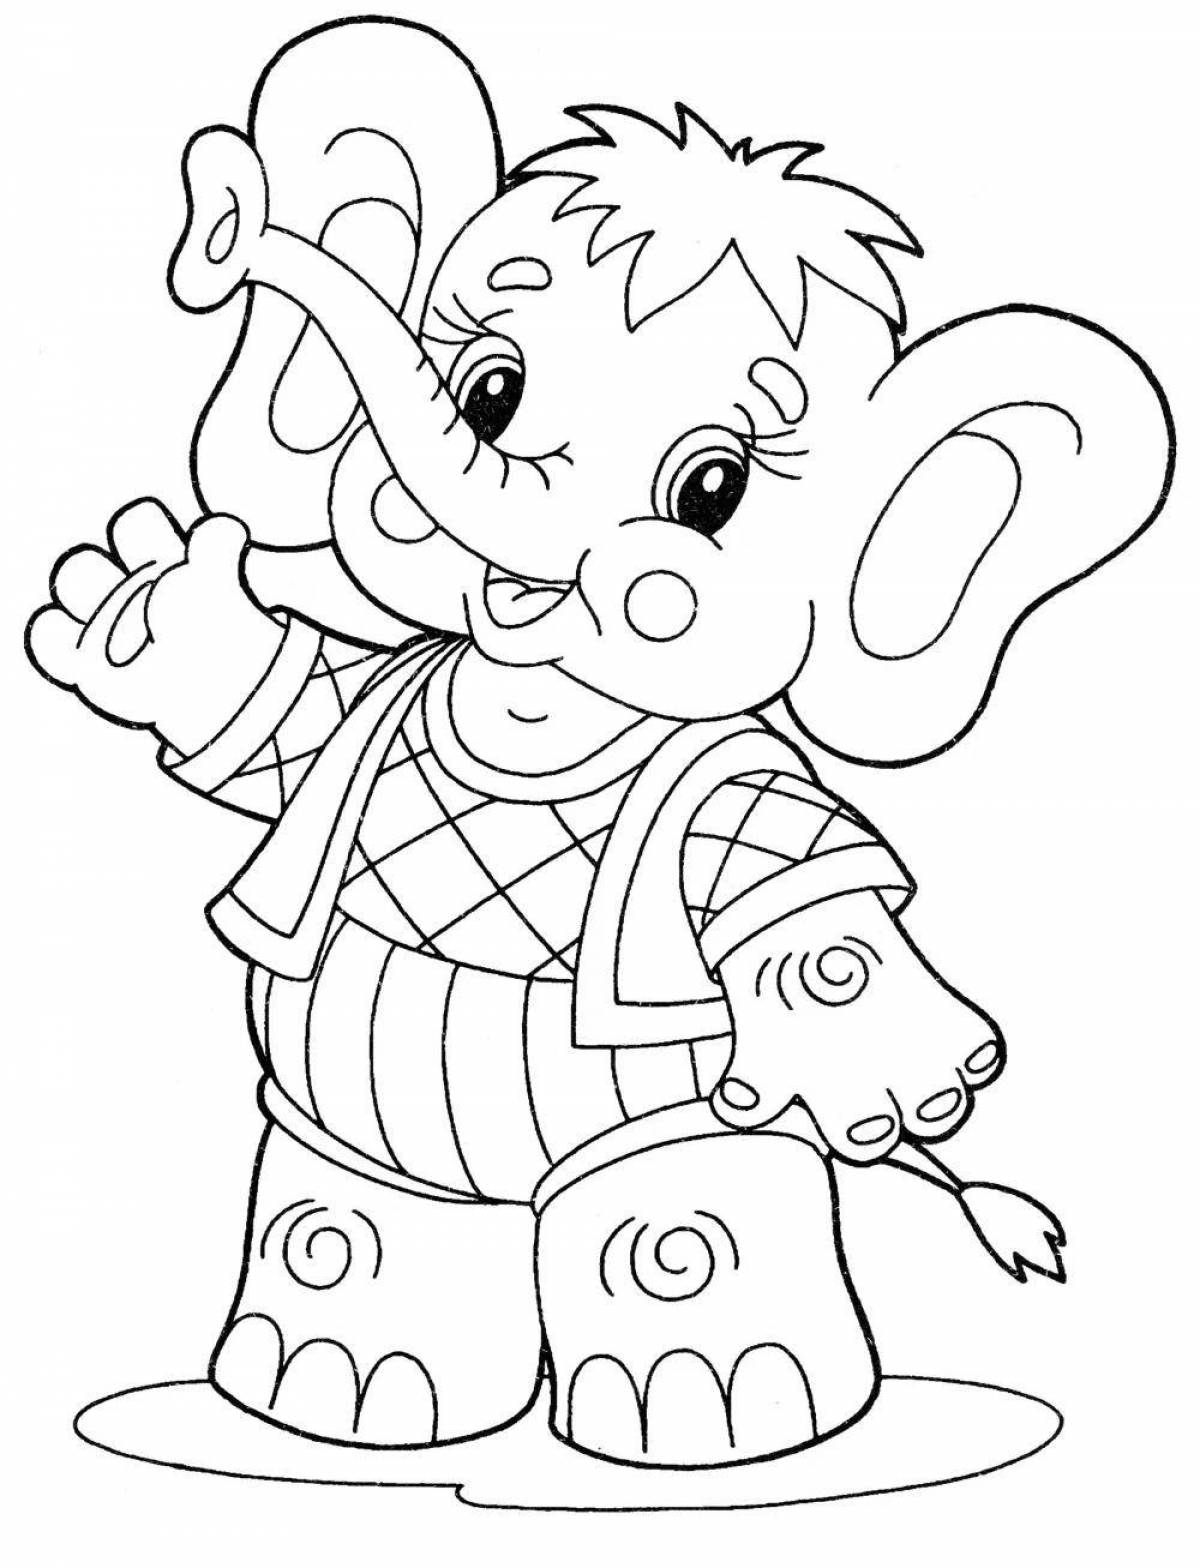 Fun elephant coloring for kids